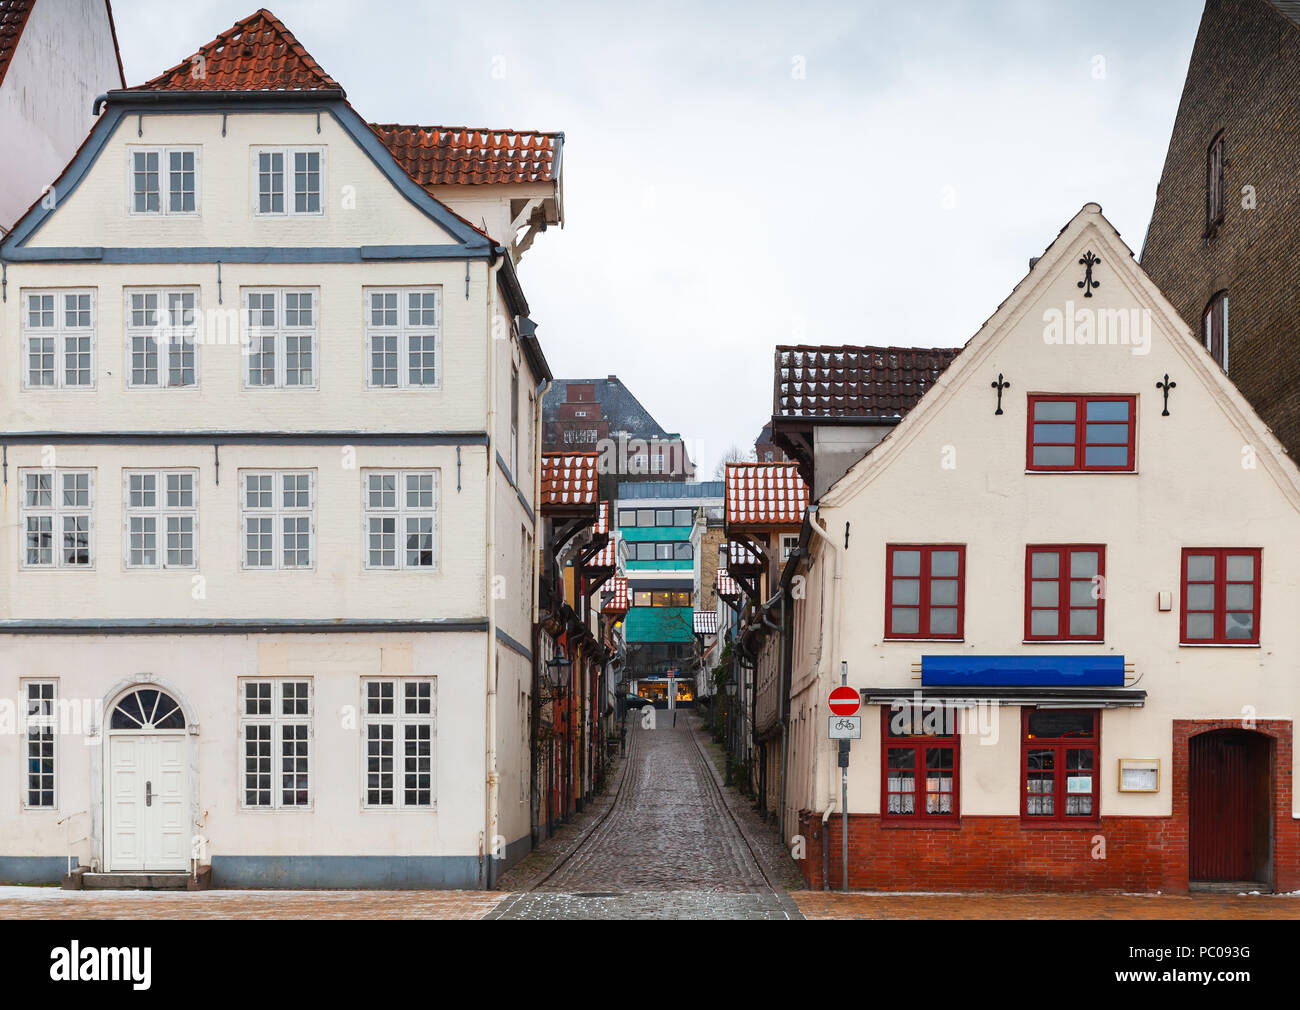 Street view with traditional colorful living houses of Flensburg, Germany Stock Photo